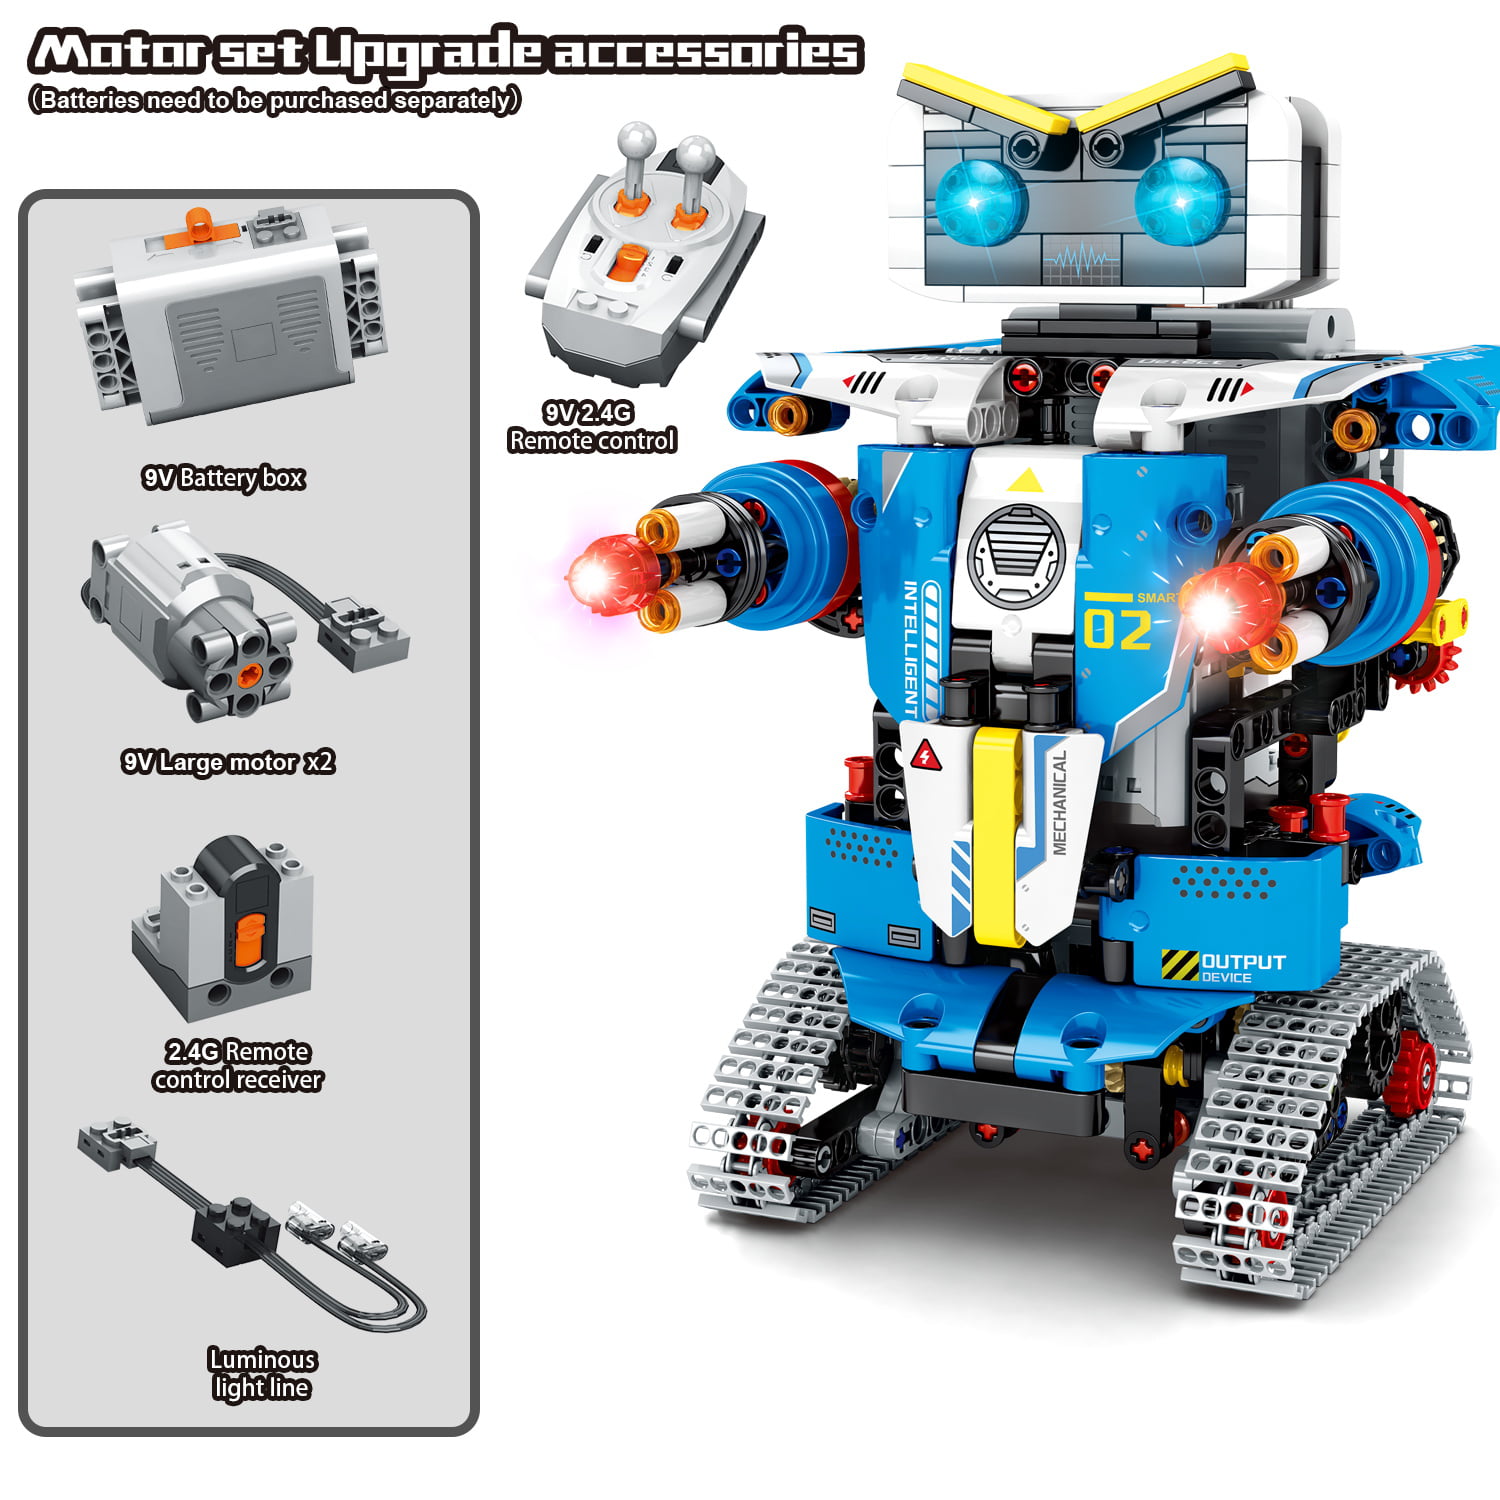 Stem Projects for Kids Ages 8-12 Remote Control Robot with APP